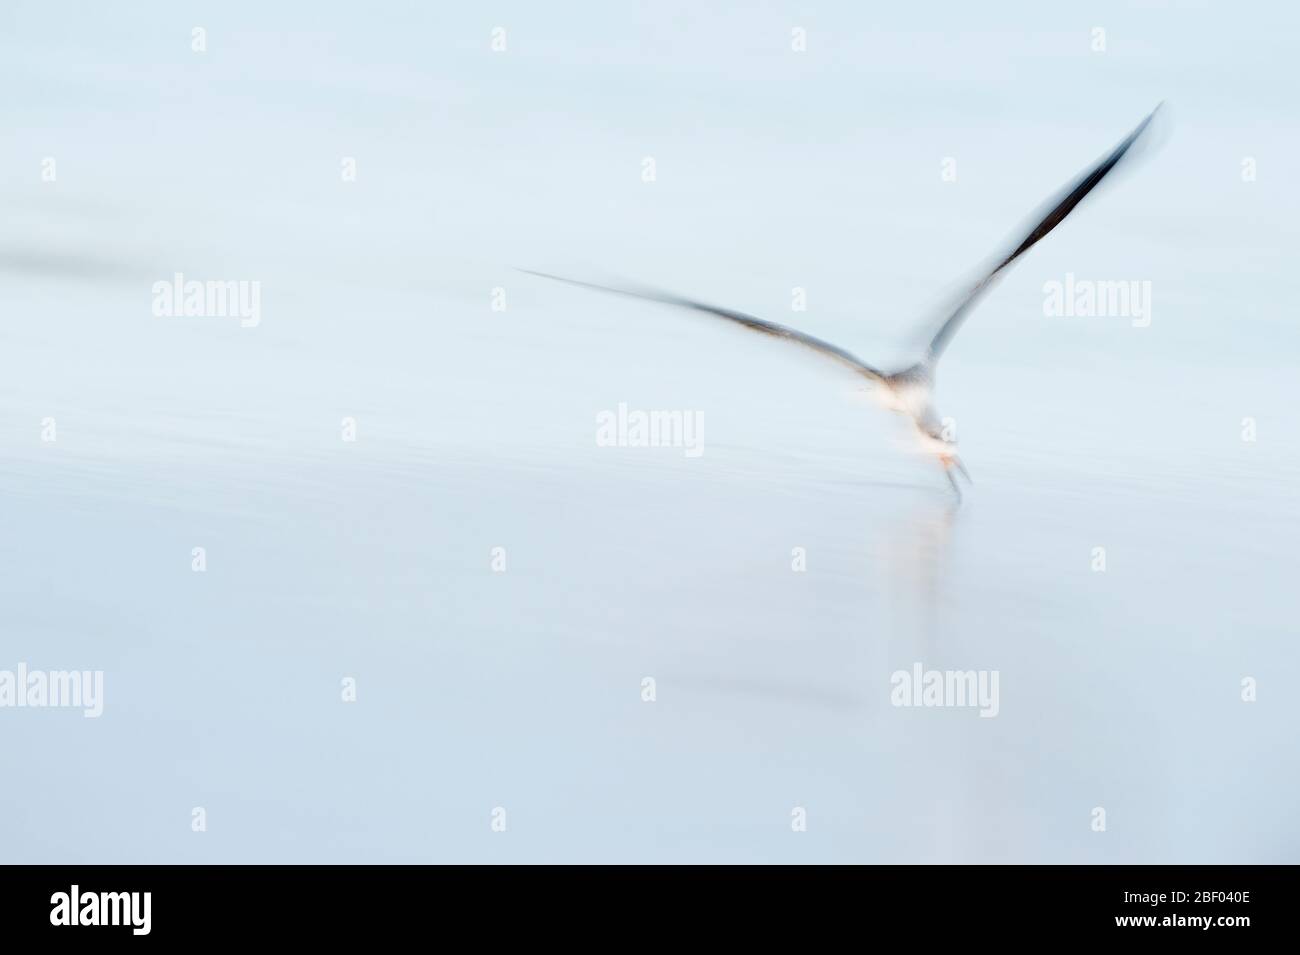 Intentional blur of a black skimmer in flight to convey a mood Stock Photo